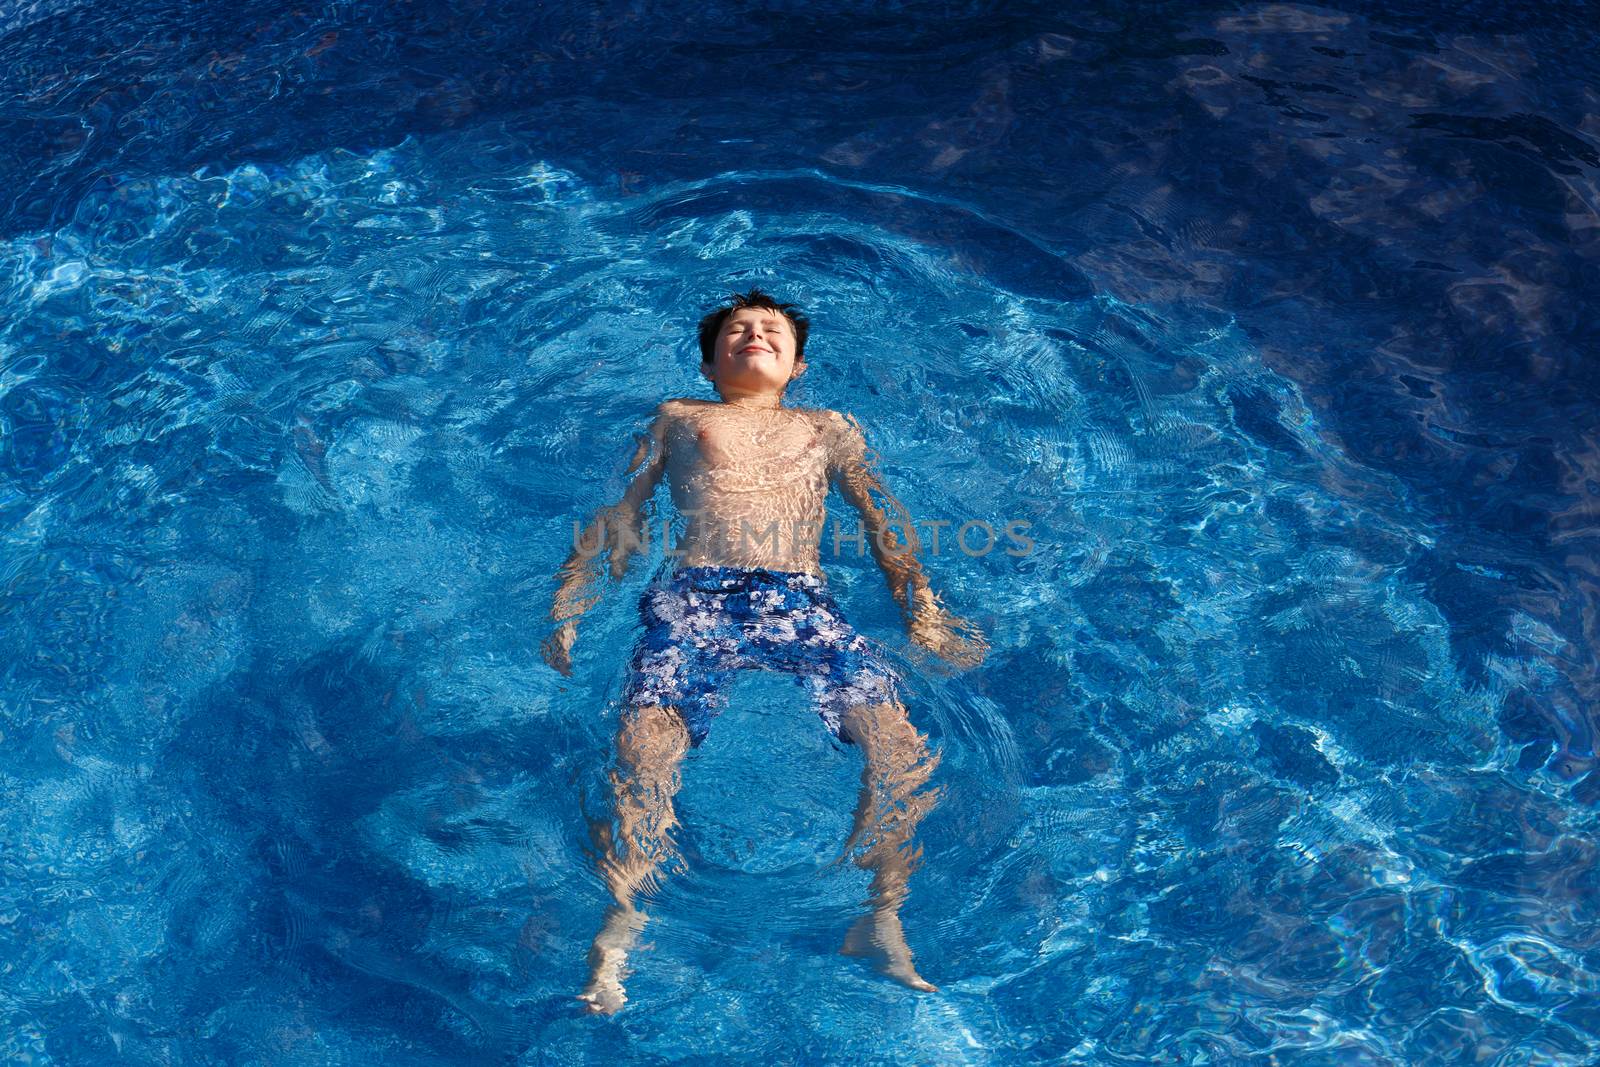 Young teenager boy in the garden swimming pool